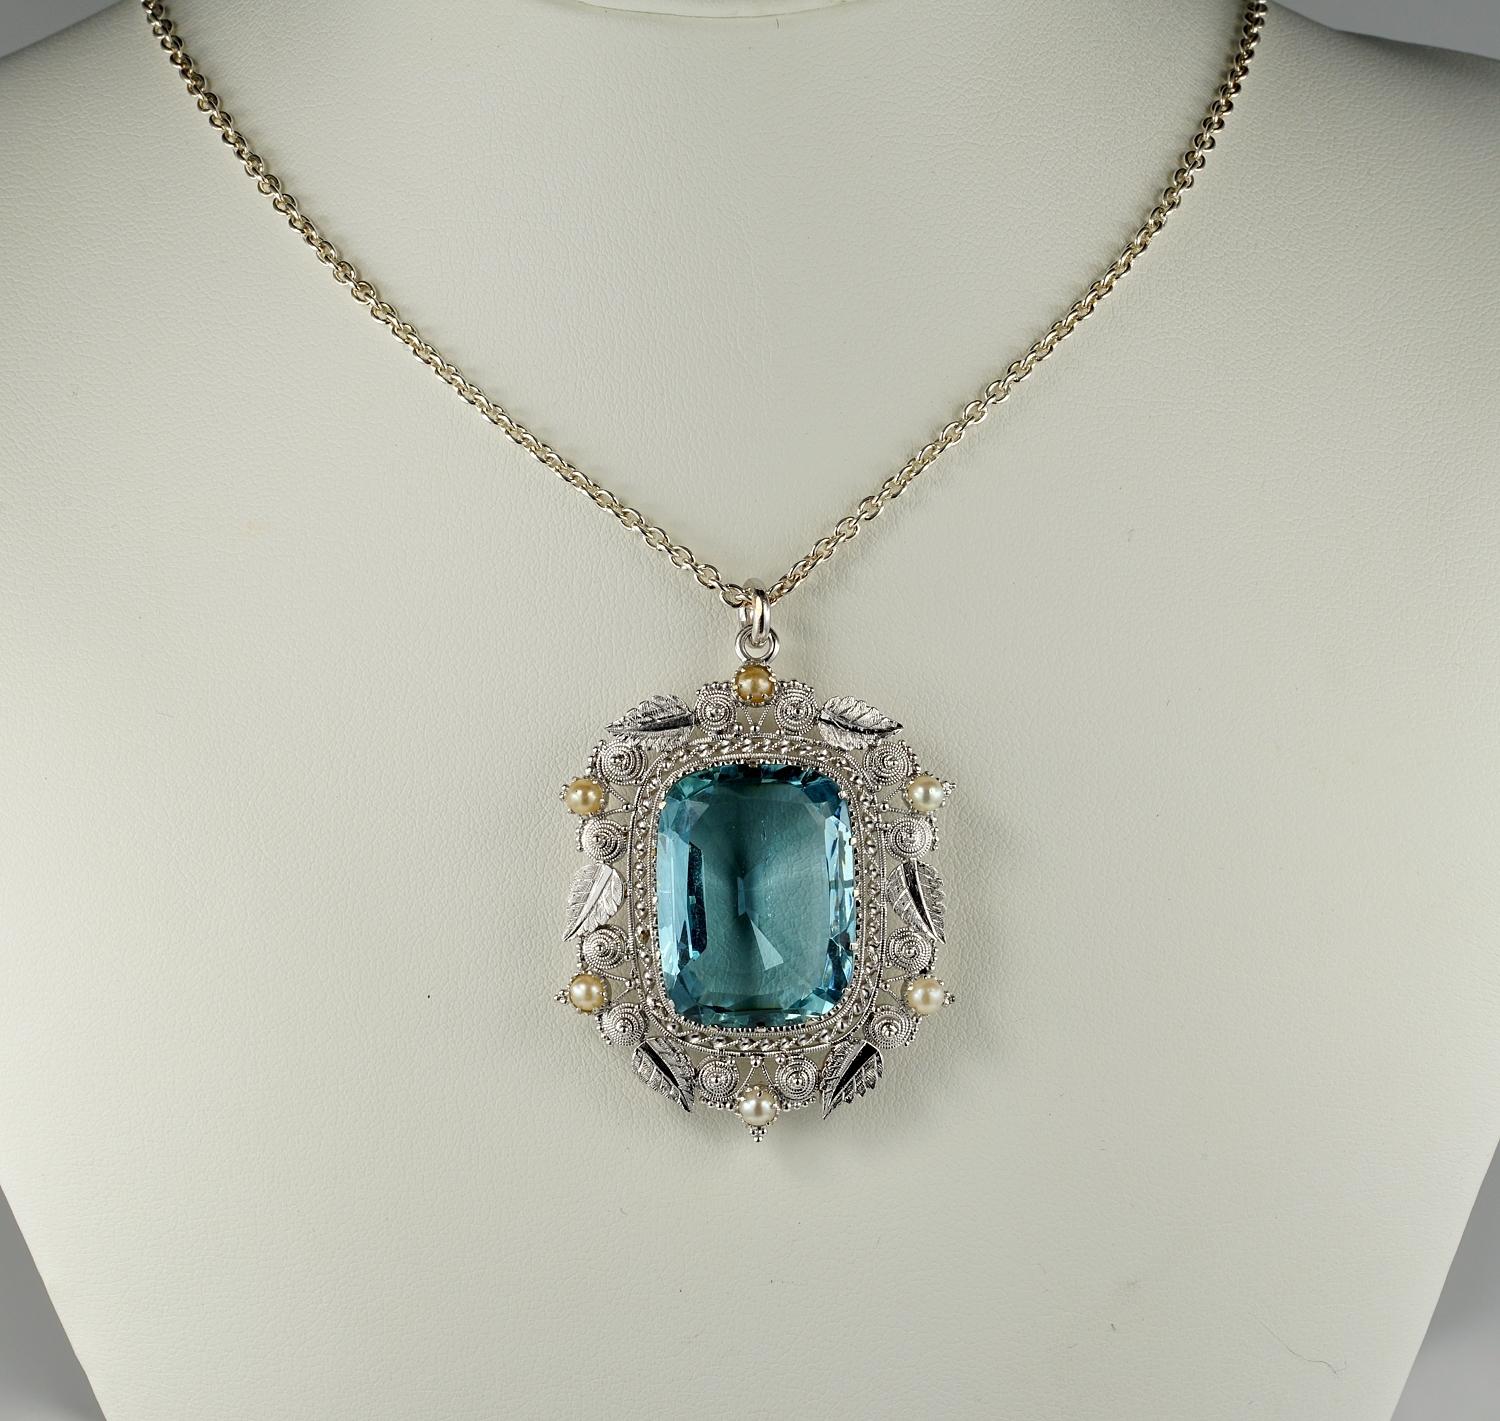 Handmade highest standard quality, designs inspired by nature, and simple straightforward construction techniques are the hallmarks of Arts and Crafts jewelry.
This amazing large Aquamarine pendant is just a wonder of that period movement.
1920 ca